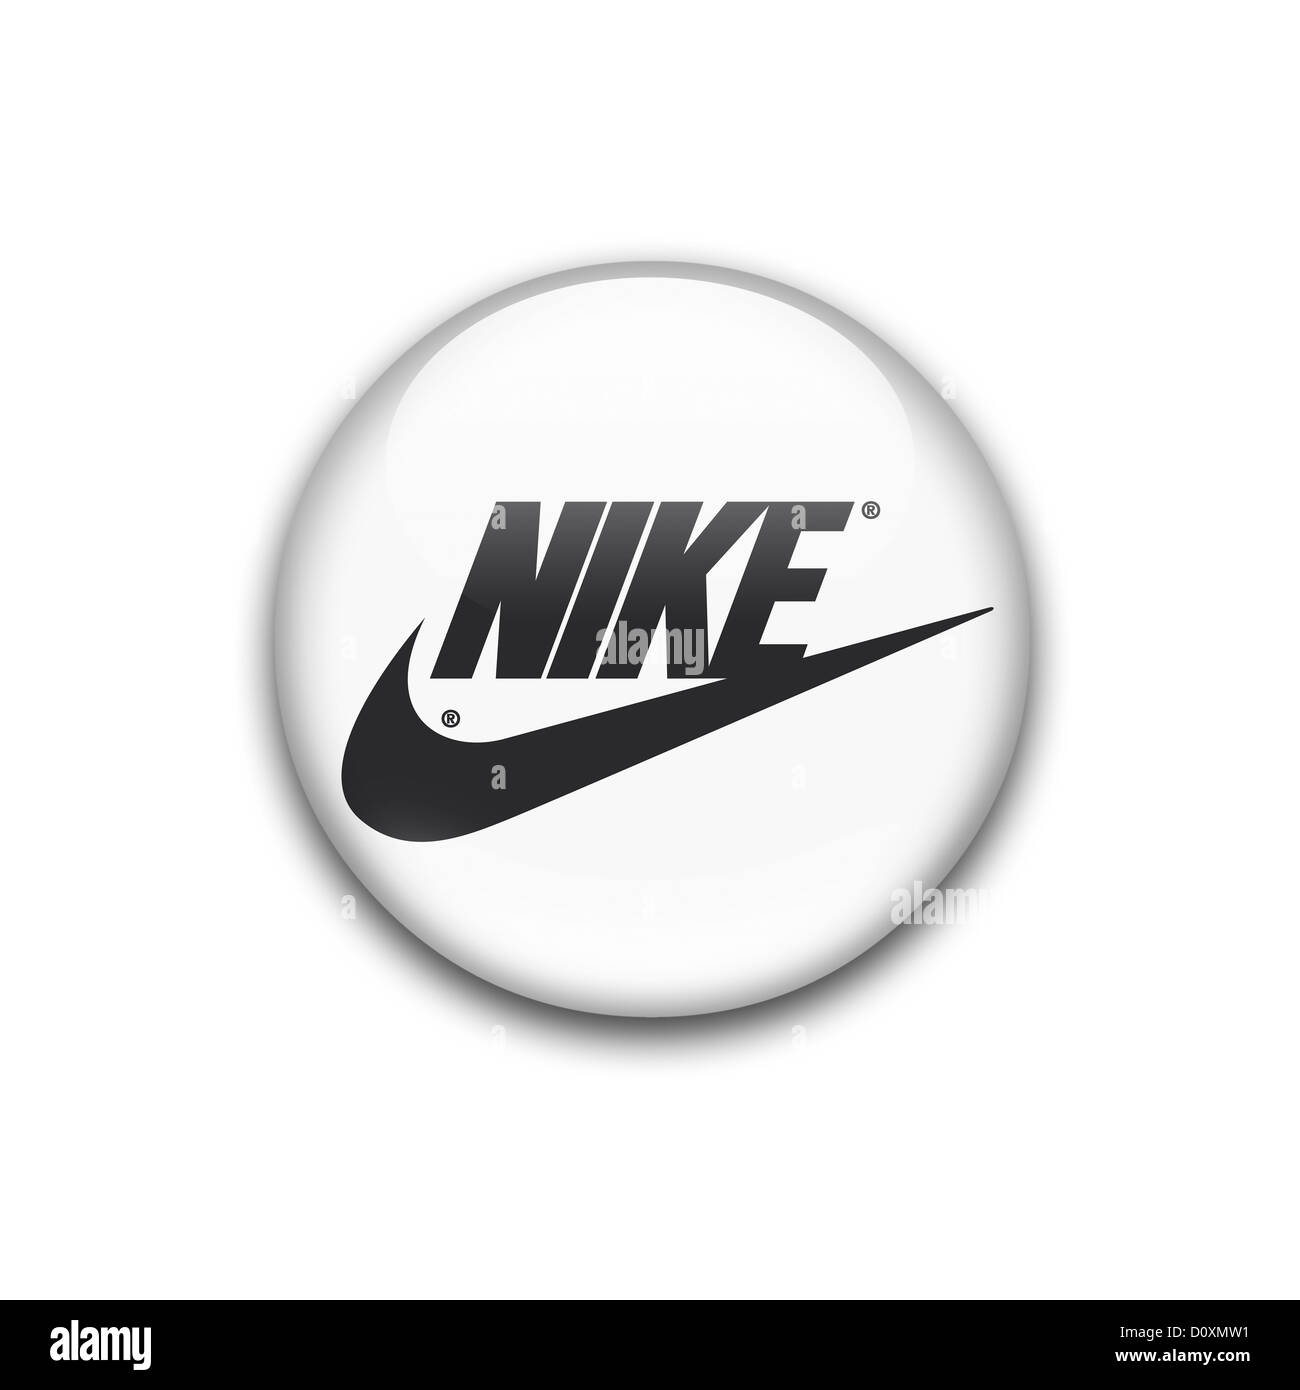 Nike Logo And Symbol, Meaning, History, PNG, Brand | 6b.u5ch.com